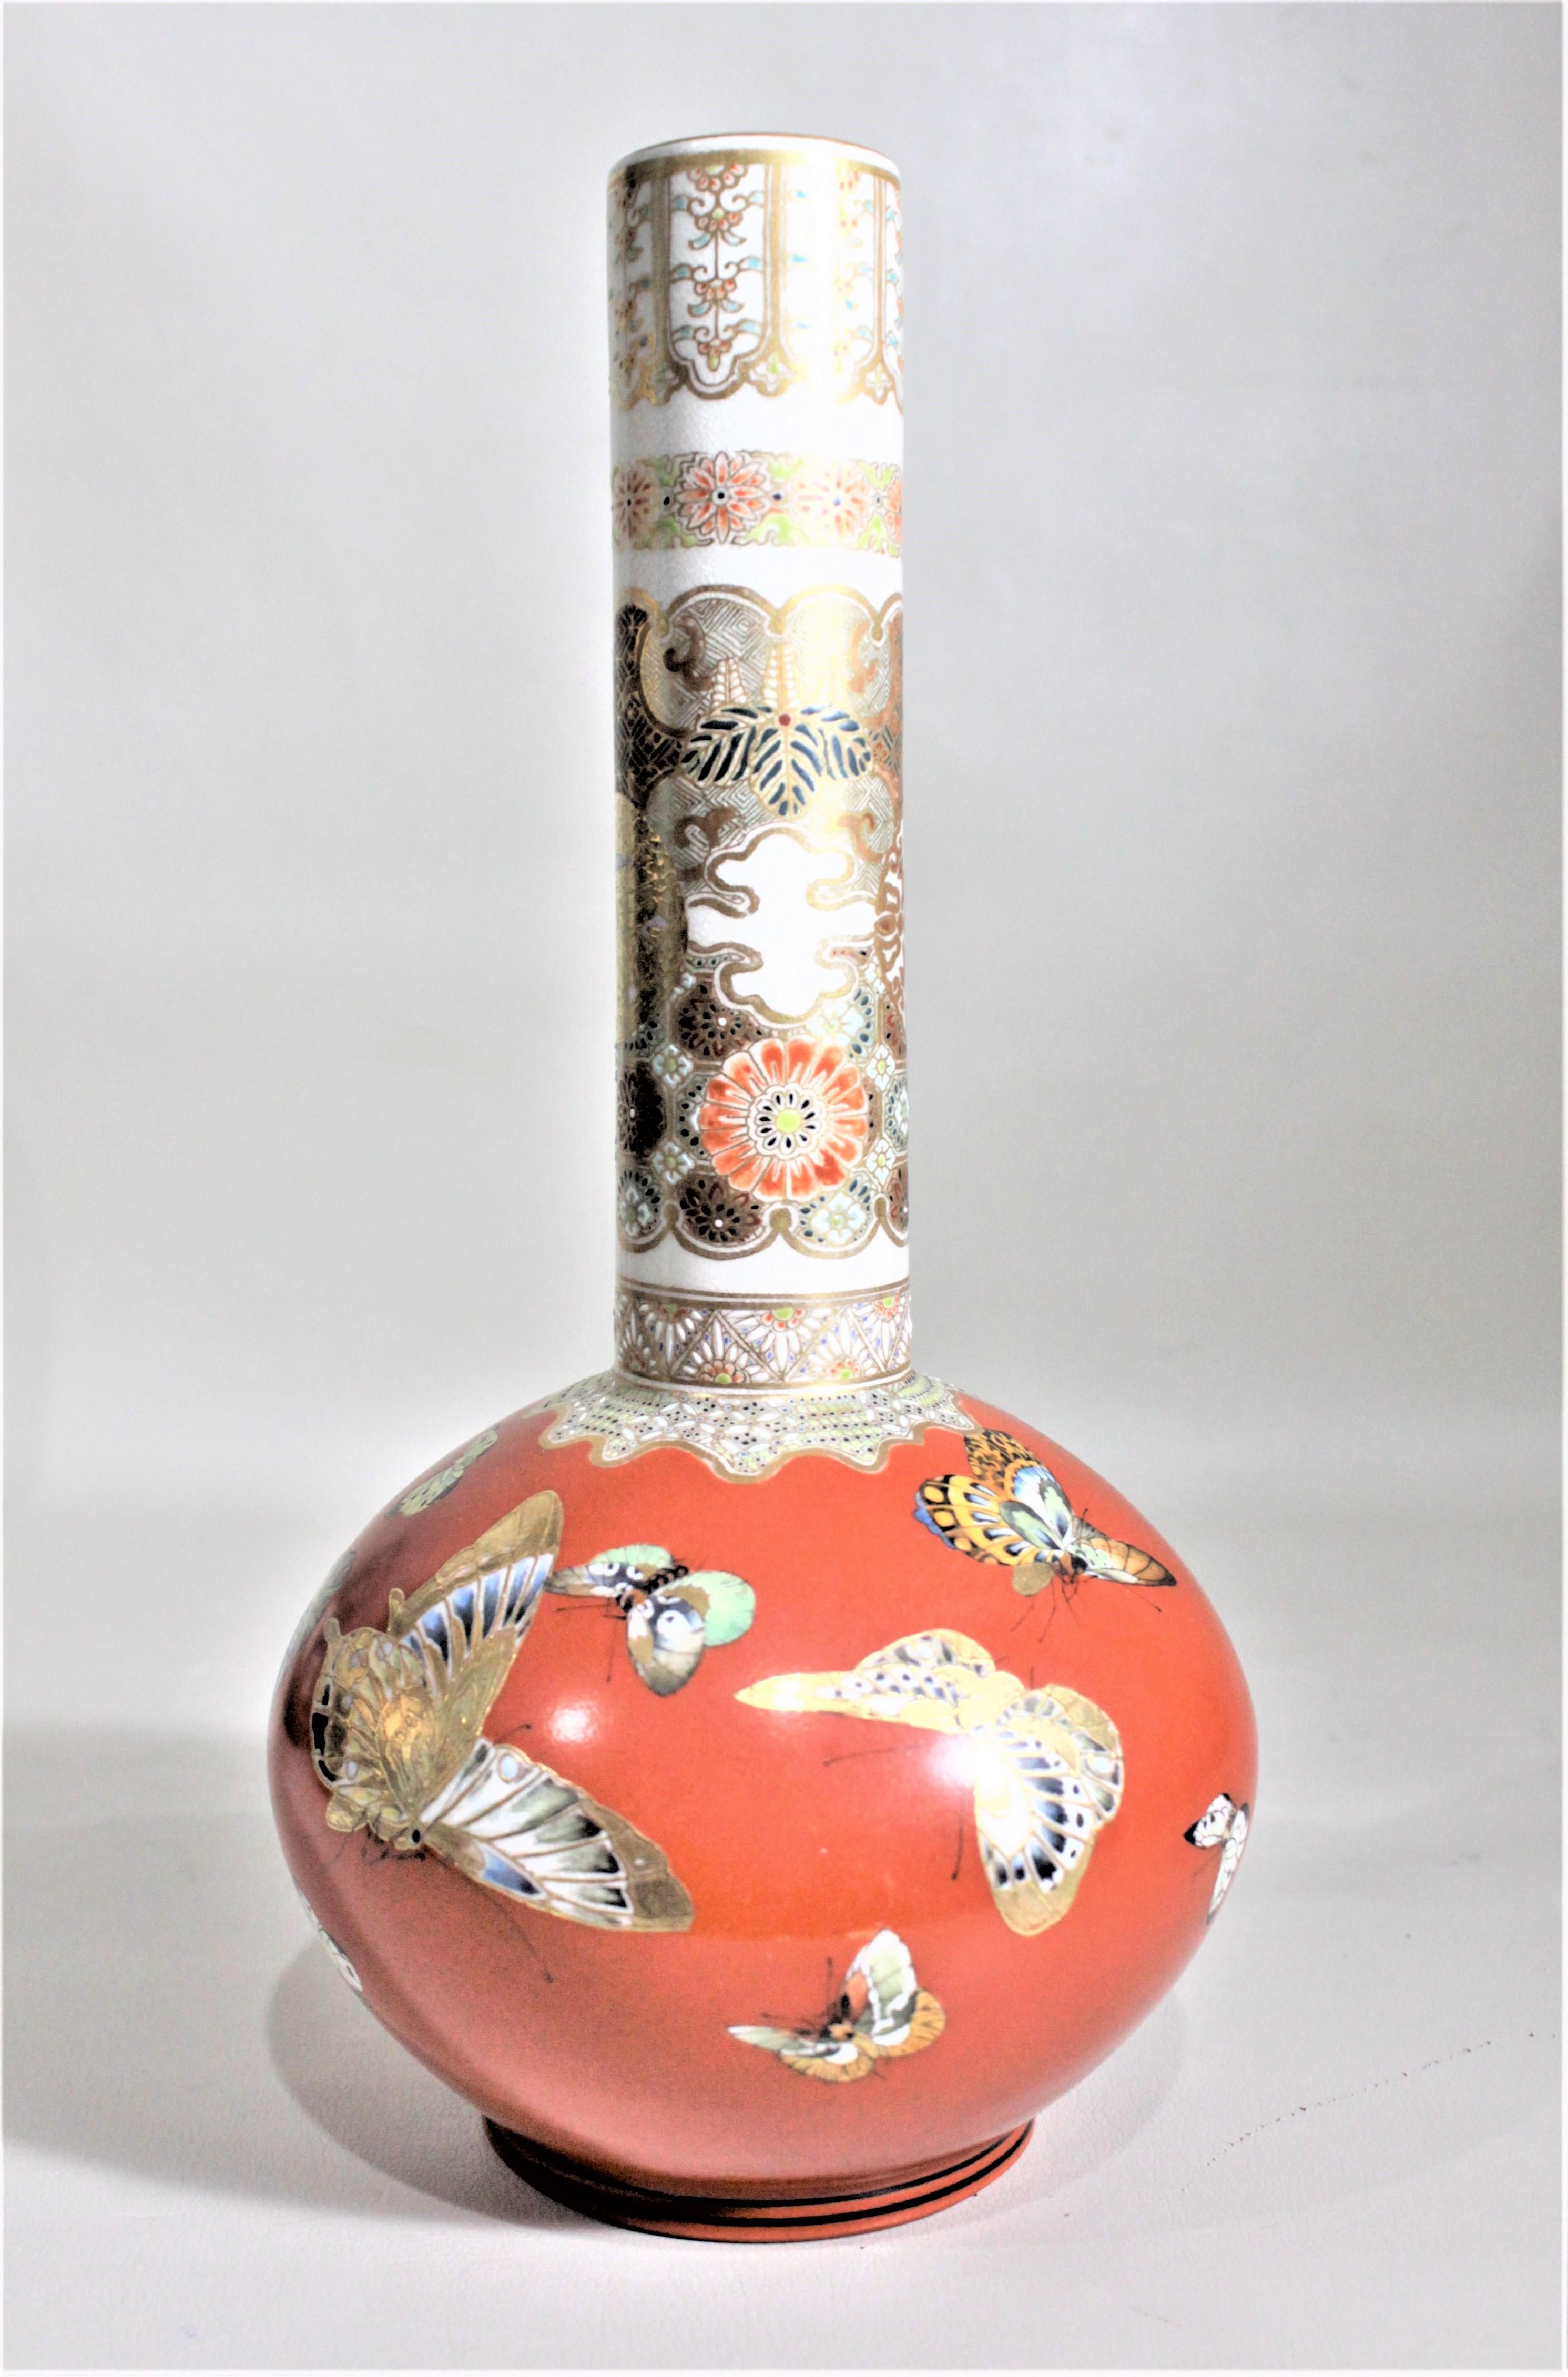 This large antique earthenware vase was made in Japan is circa 1900 in the Meiji period and style. This vase stands a foot high and is done with a very vibrant orange ground with numerous well executed butterflies in flight in varying sizes around